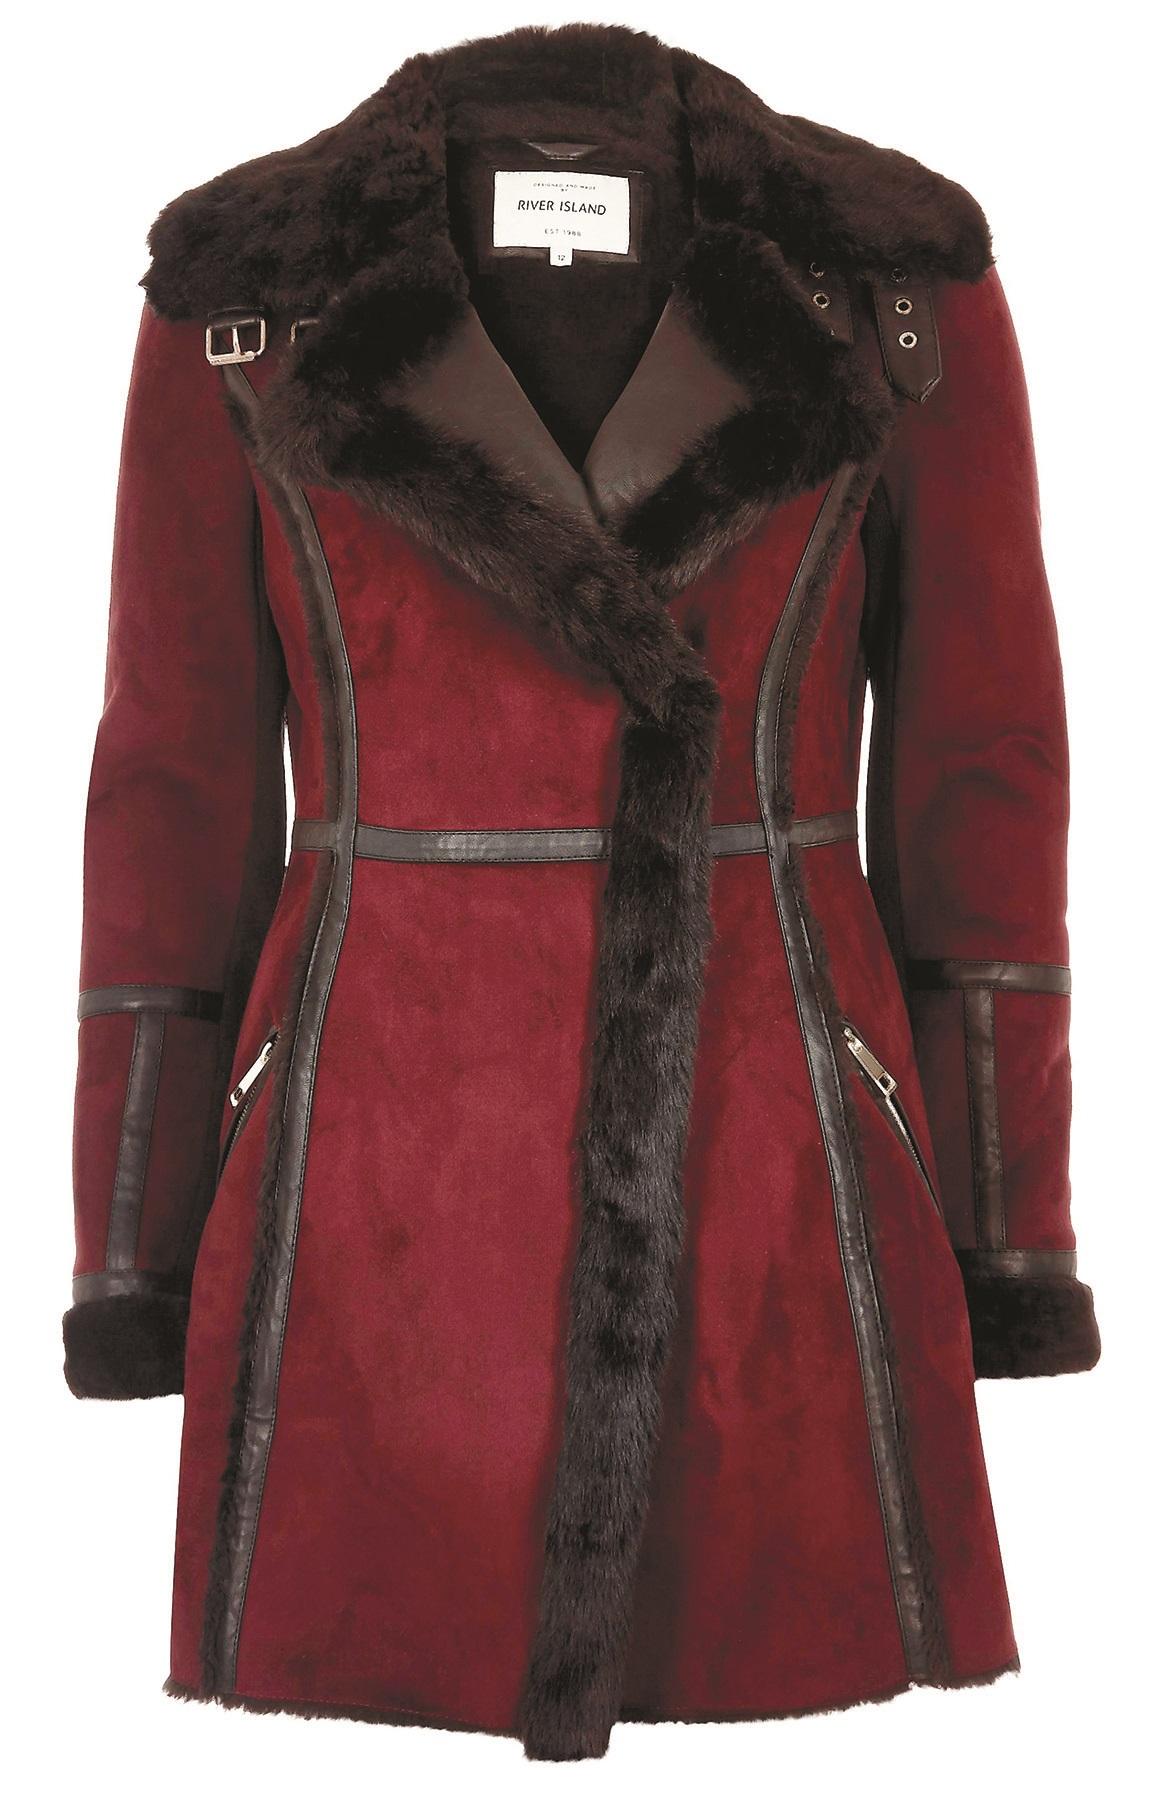 River Island, Leather and Shearling Coat, £110